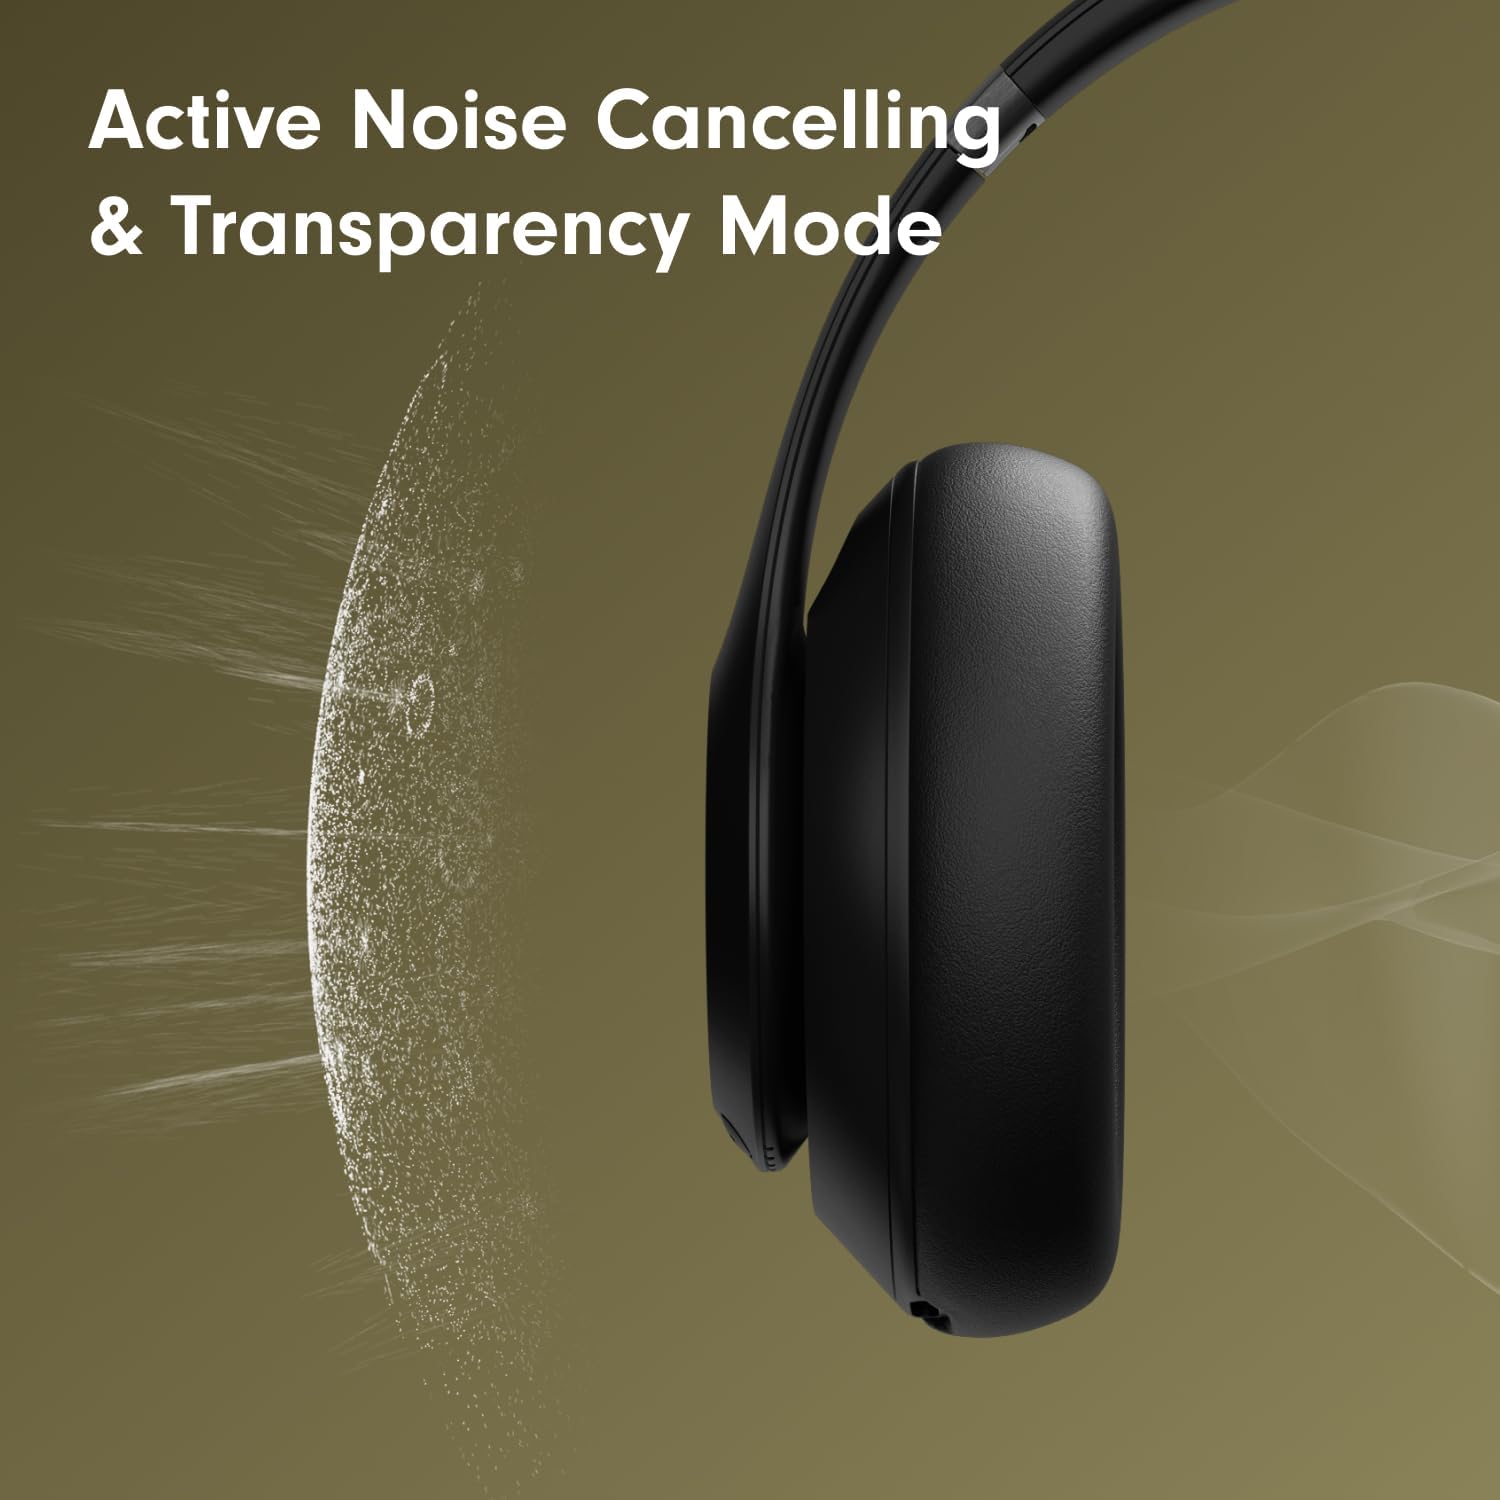 Headphones with ANC and transparency listening modes 0194253715092